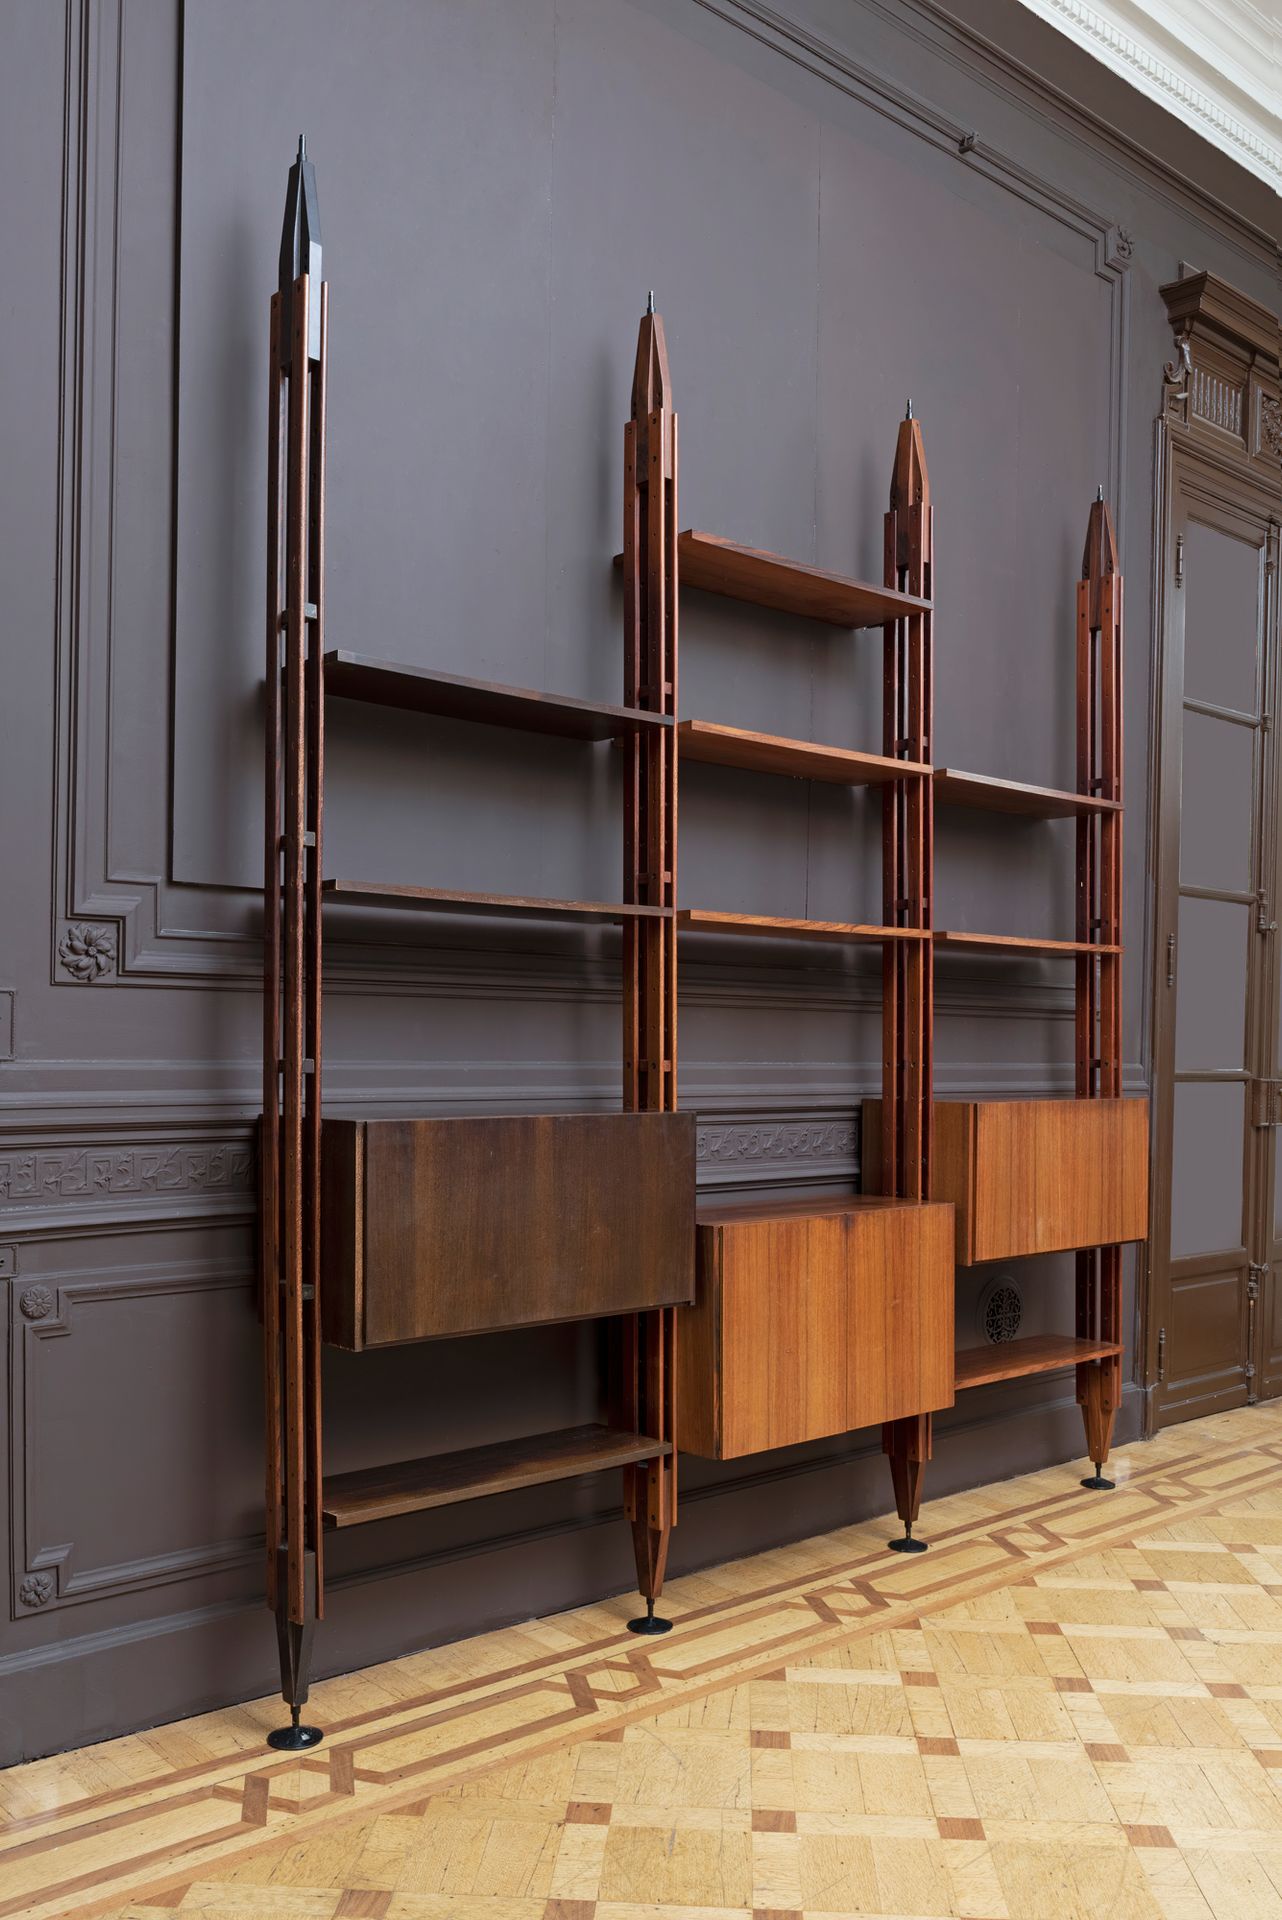 FRANCO ALBINI (1905-1977) Y
Mod. LB7
Modular bookcase with four uprights and she&hellip;